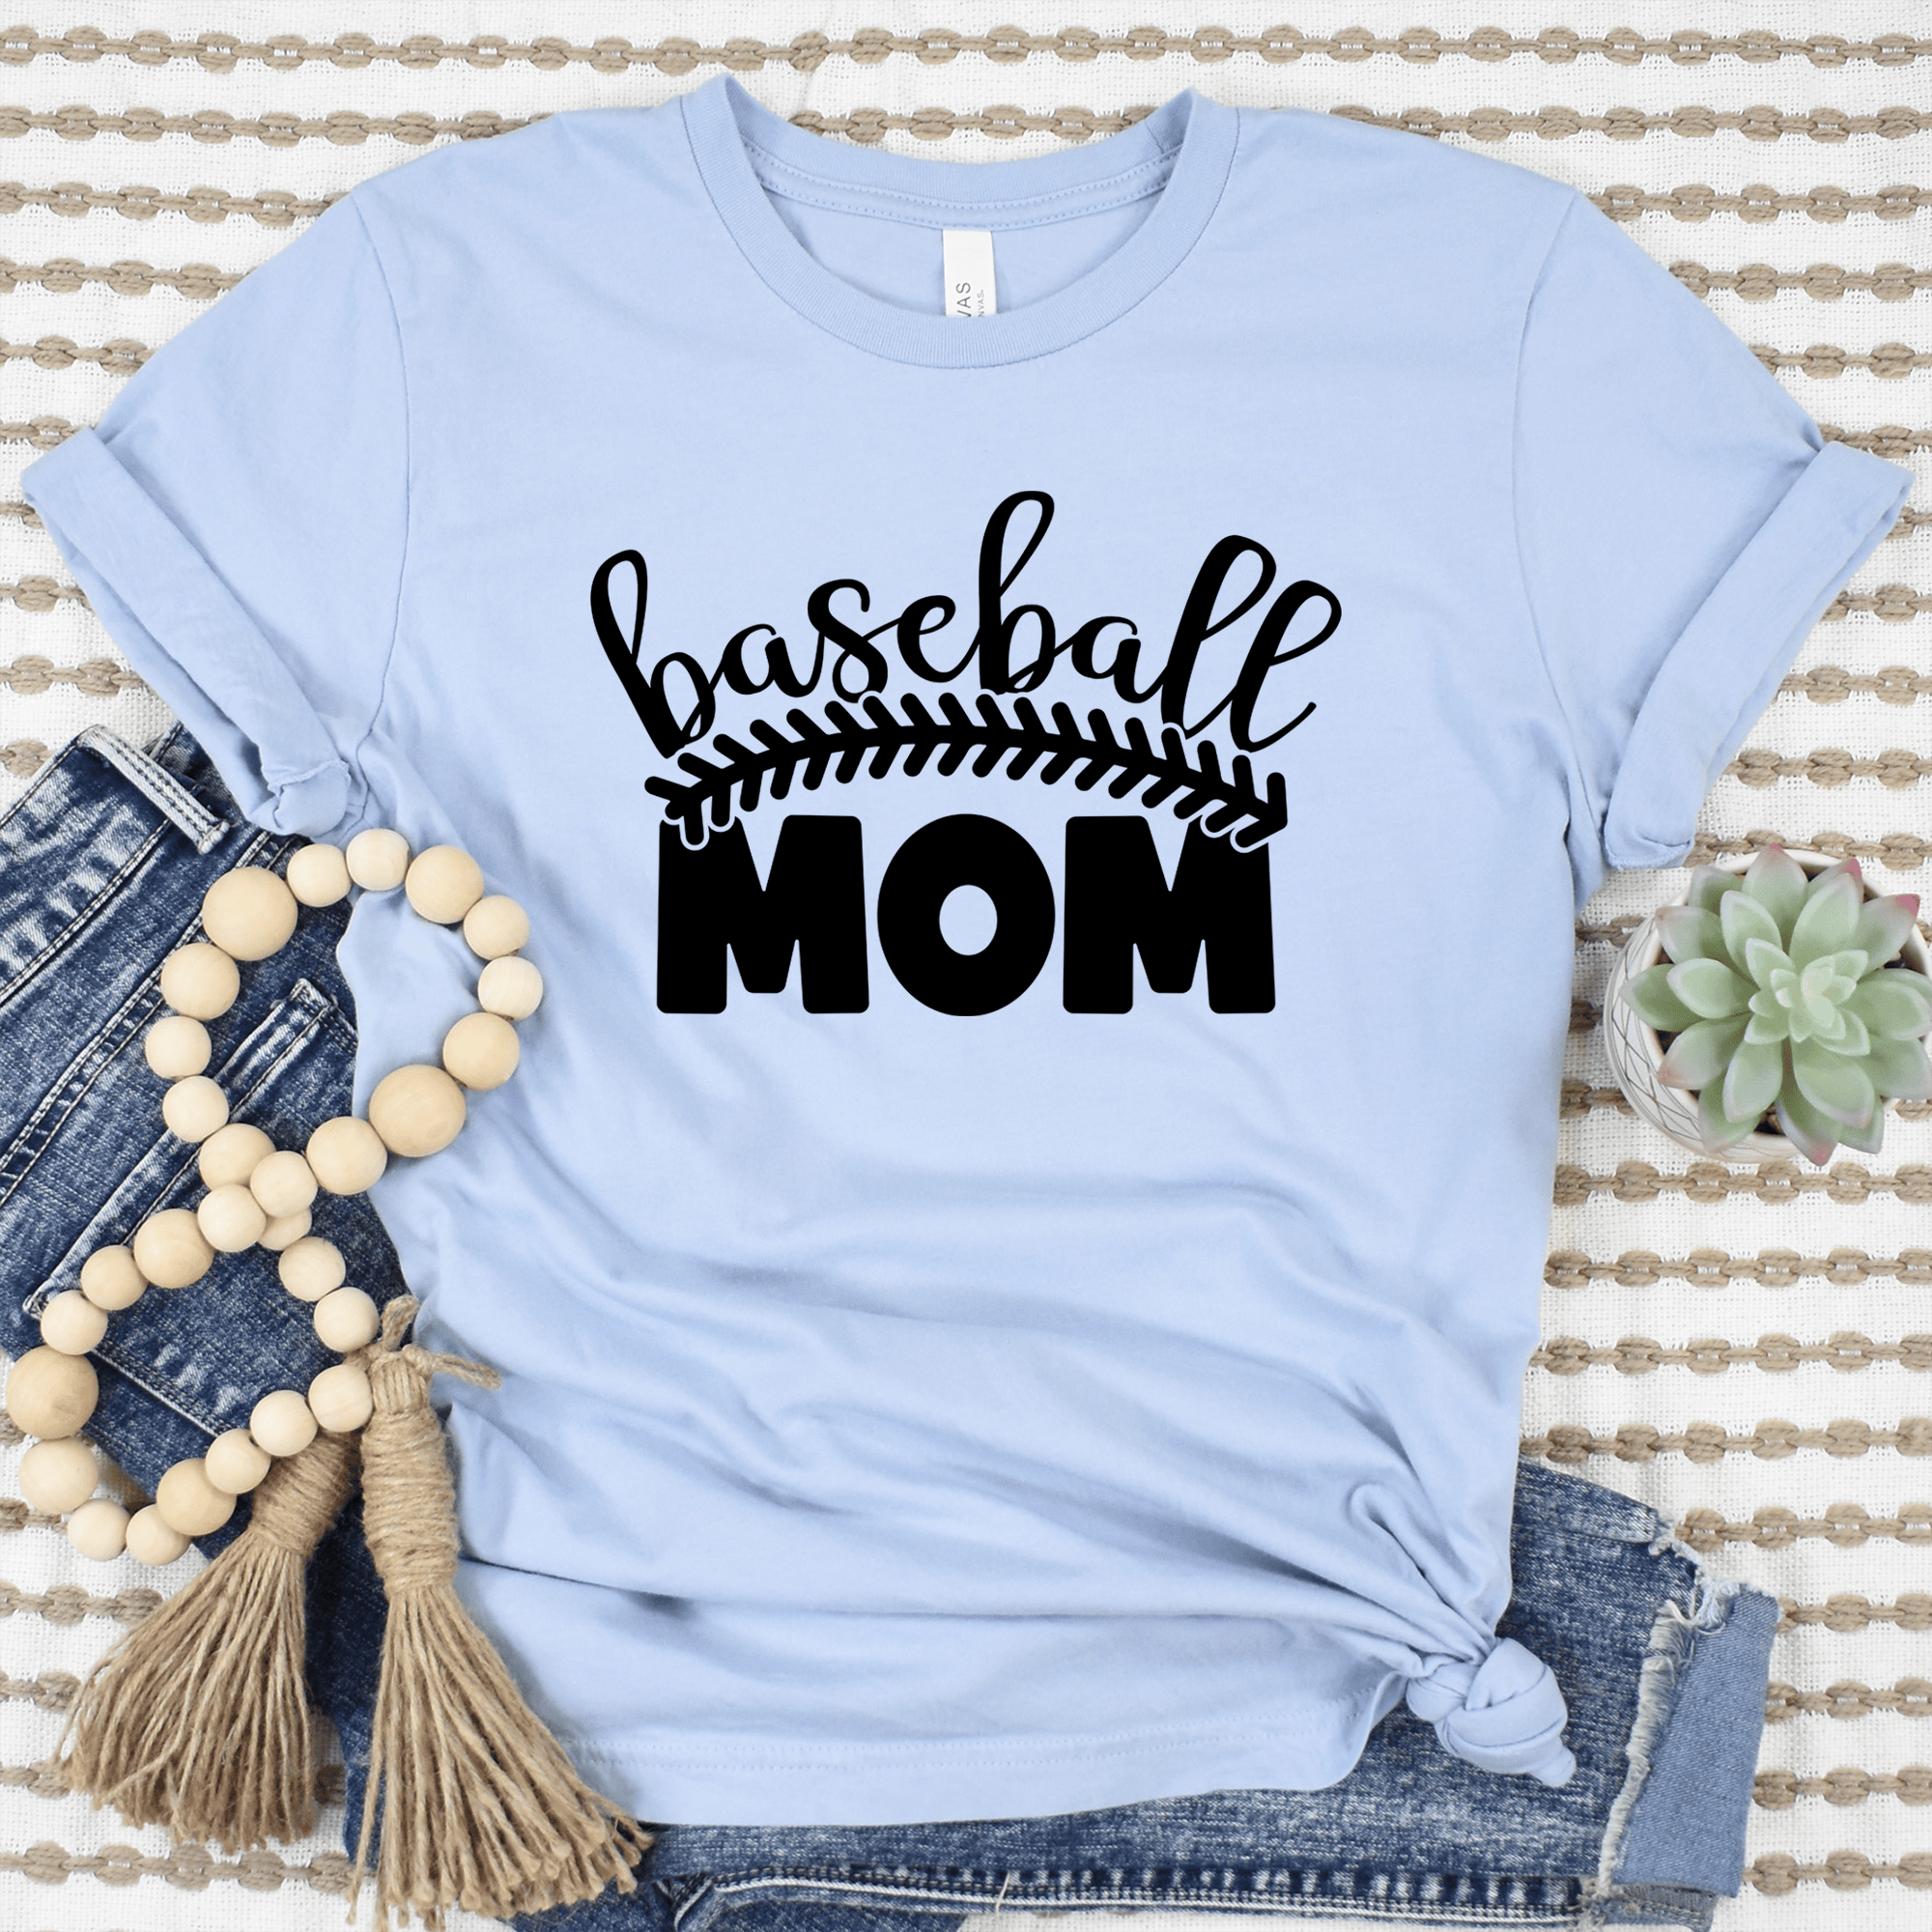 Womens Light Blue T Shirt with Stitched-Baseball-Mom design